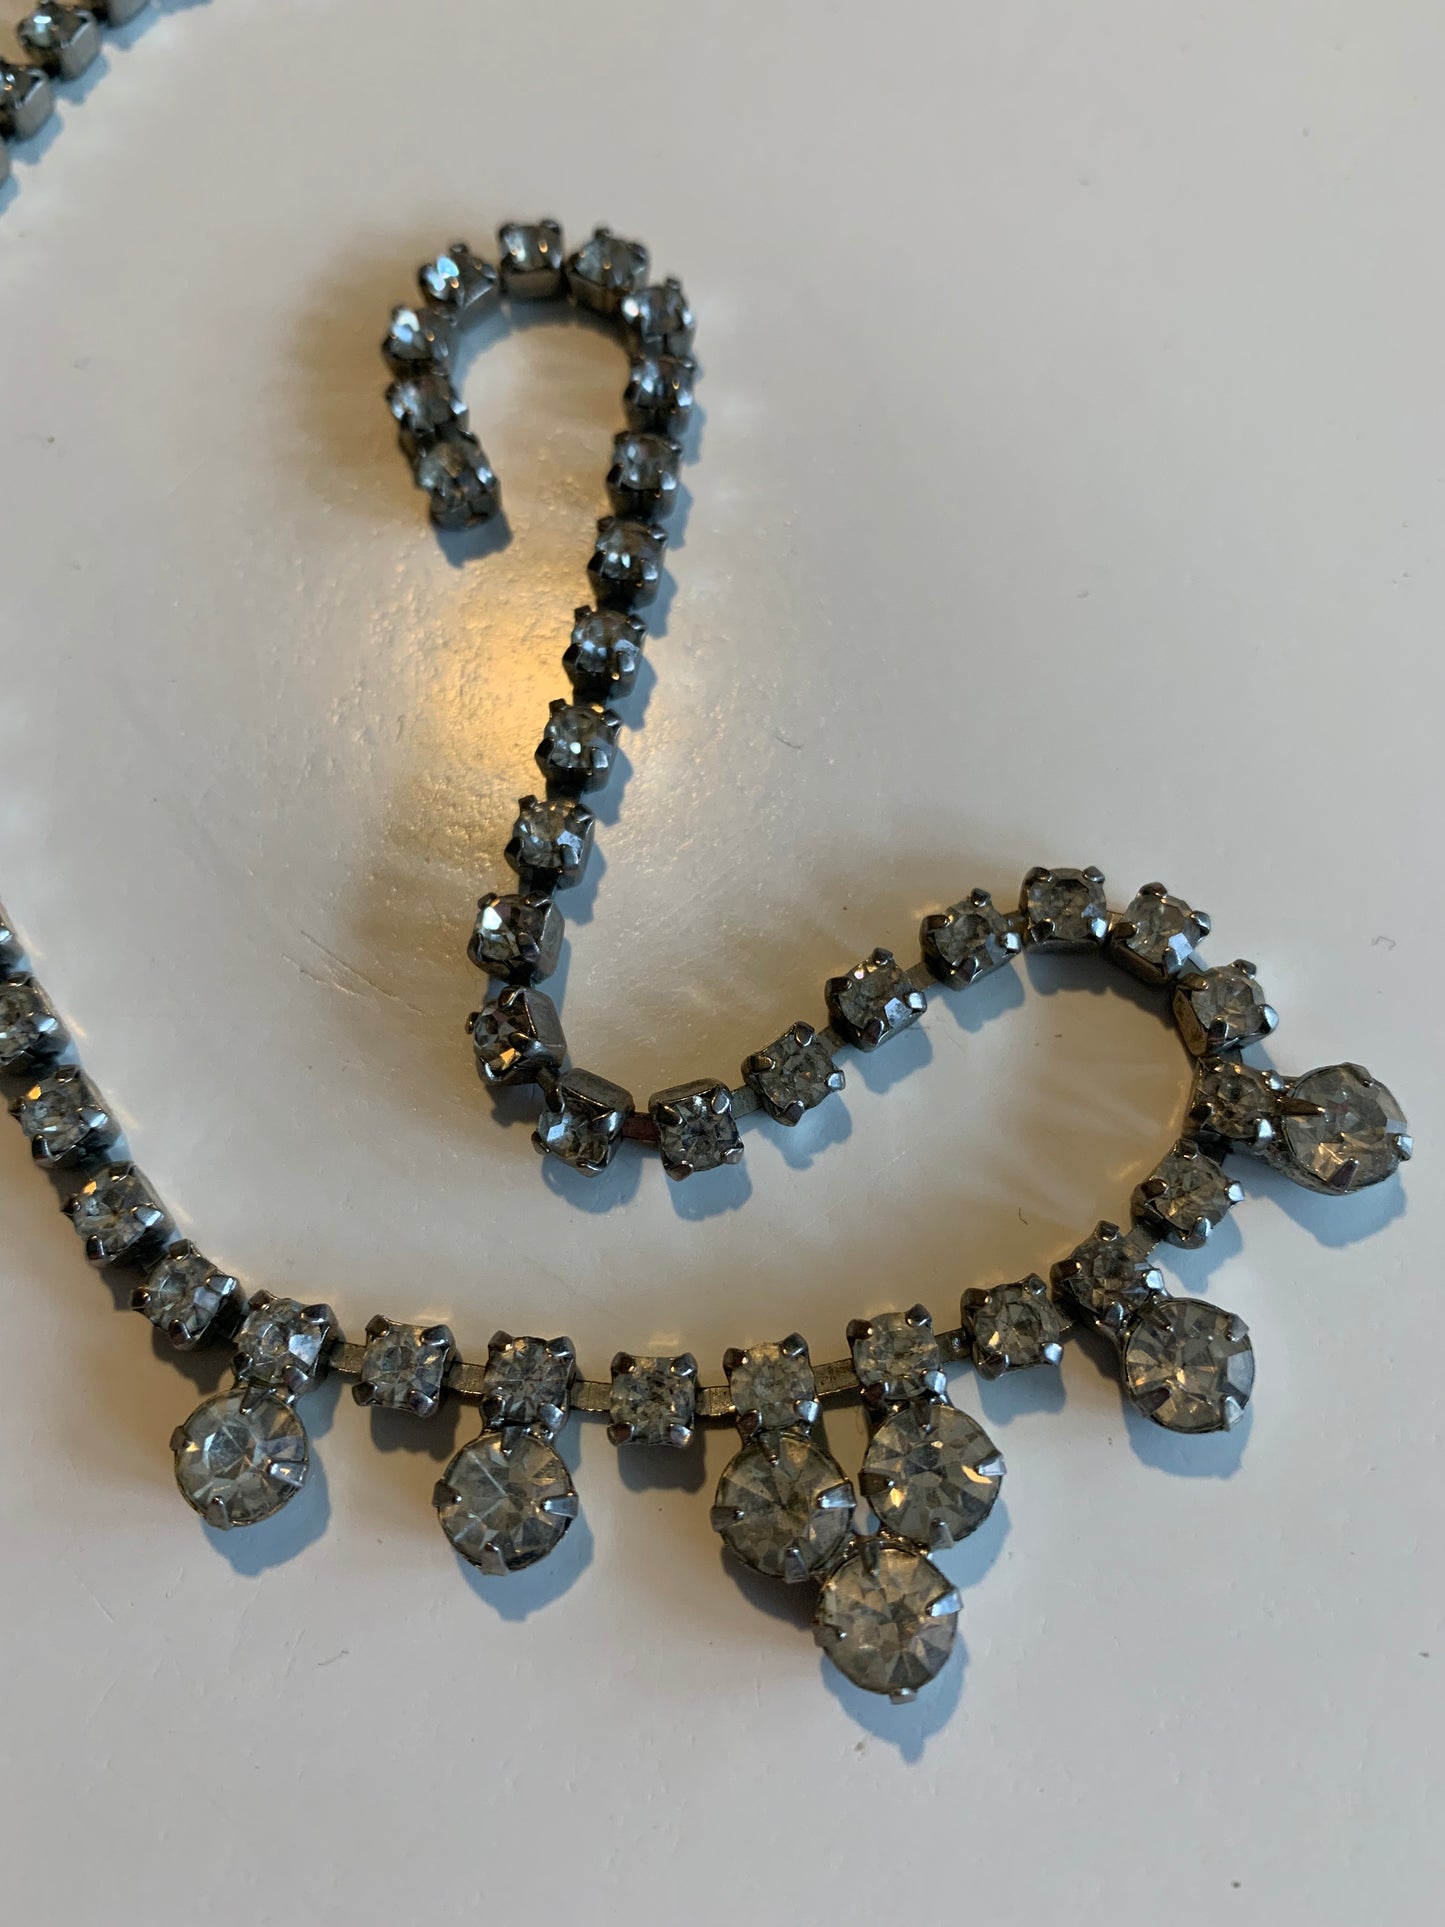 Staggered Front Rhinestone Necklace circa 1950s